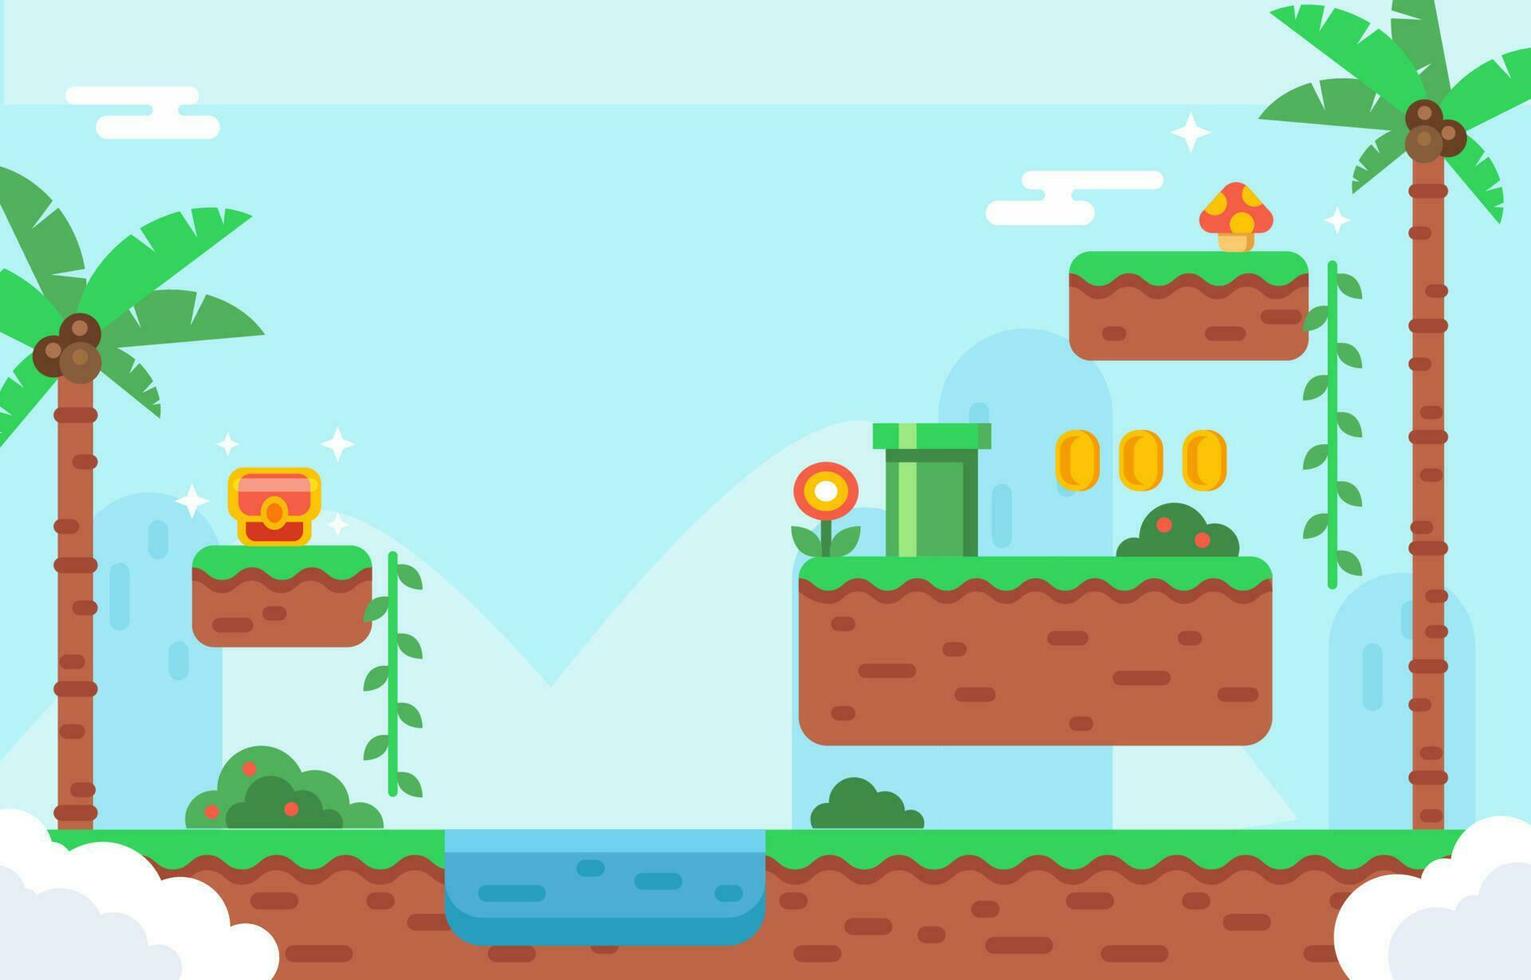 Game Design Background in Flat Style vector